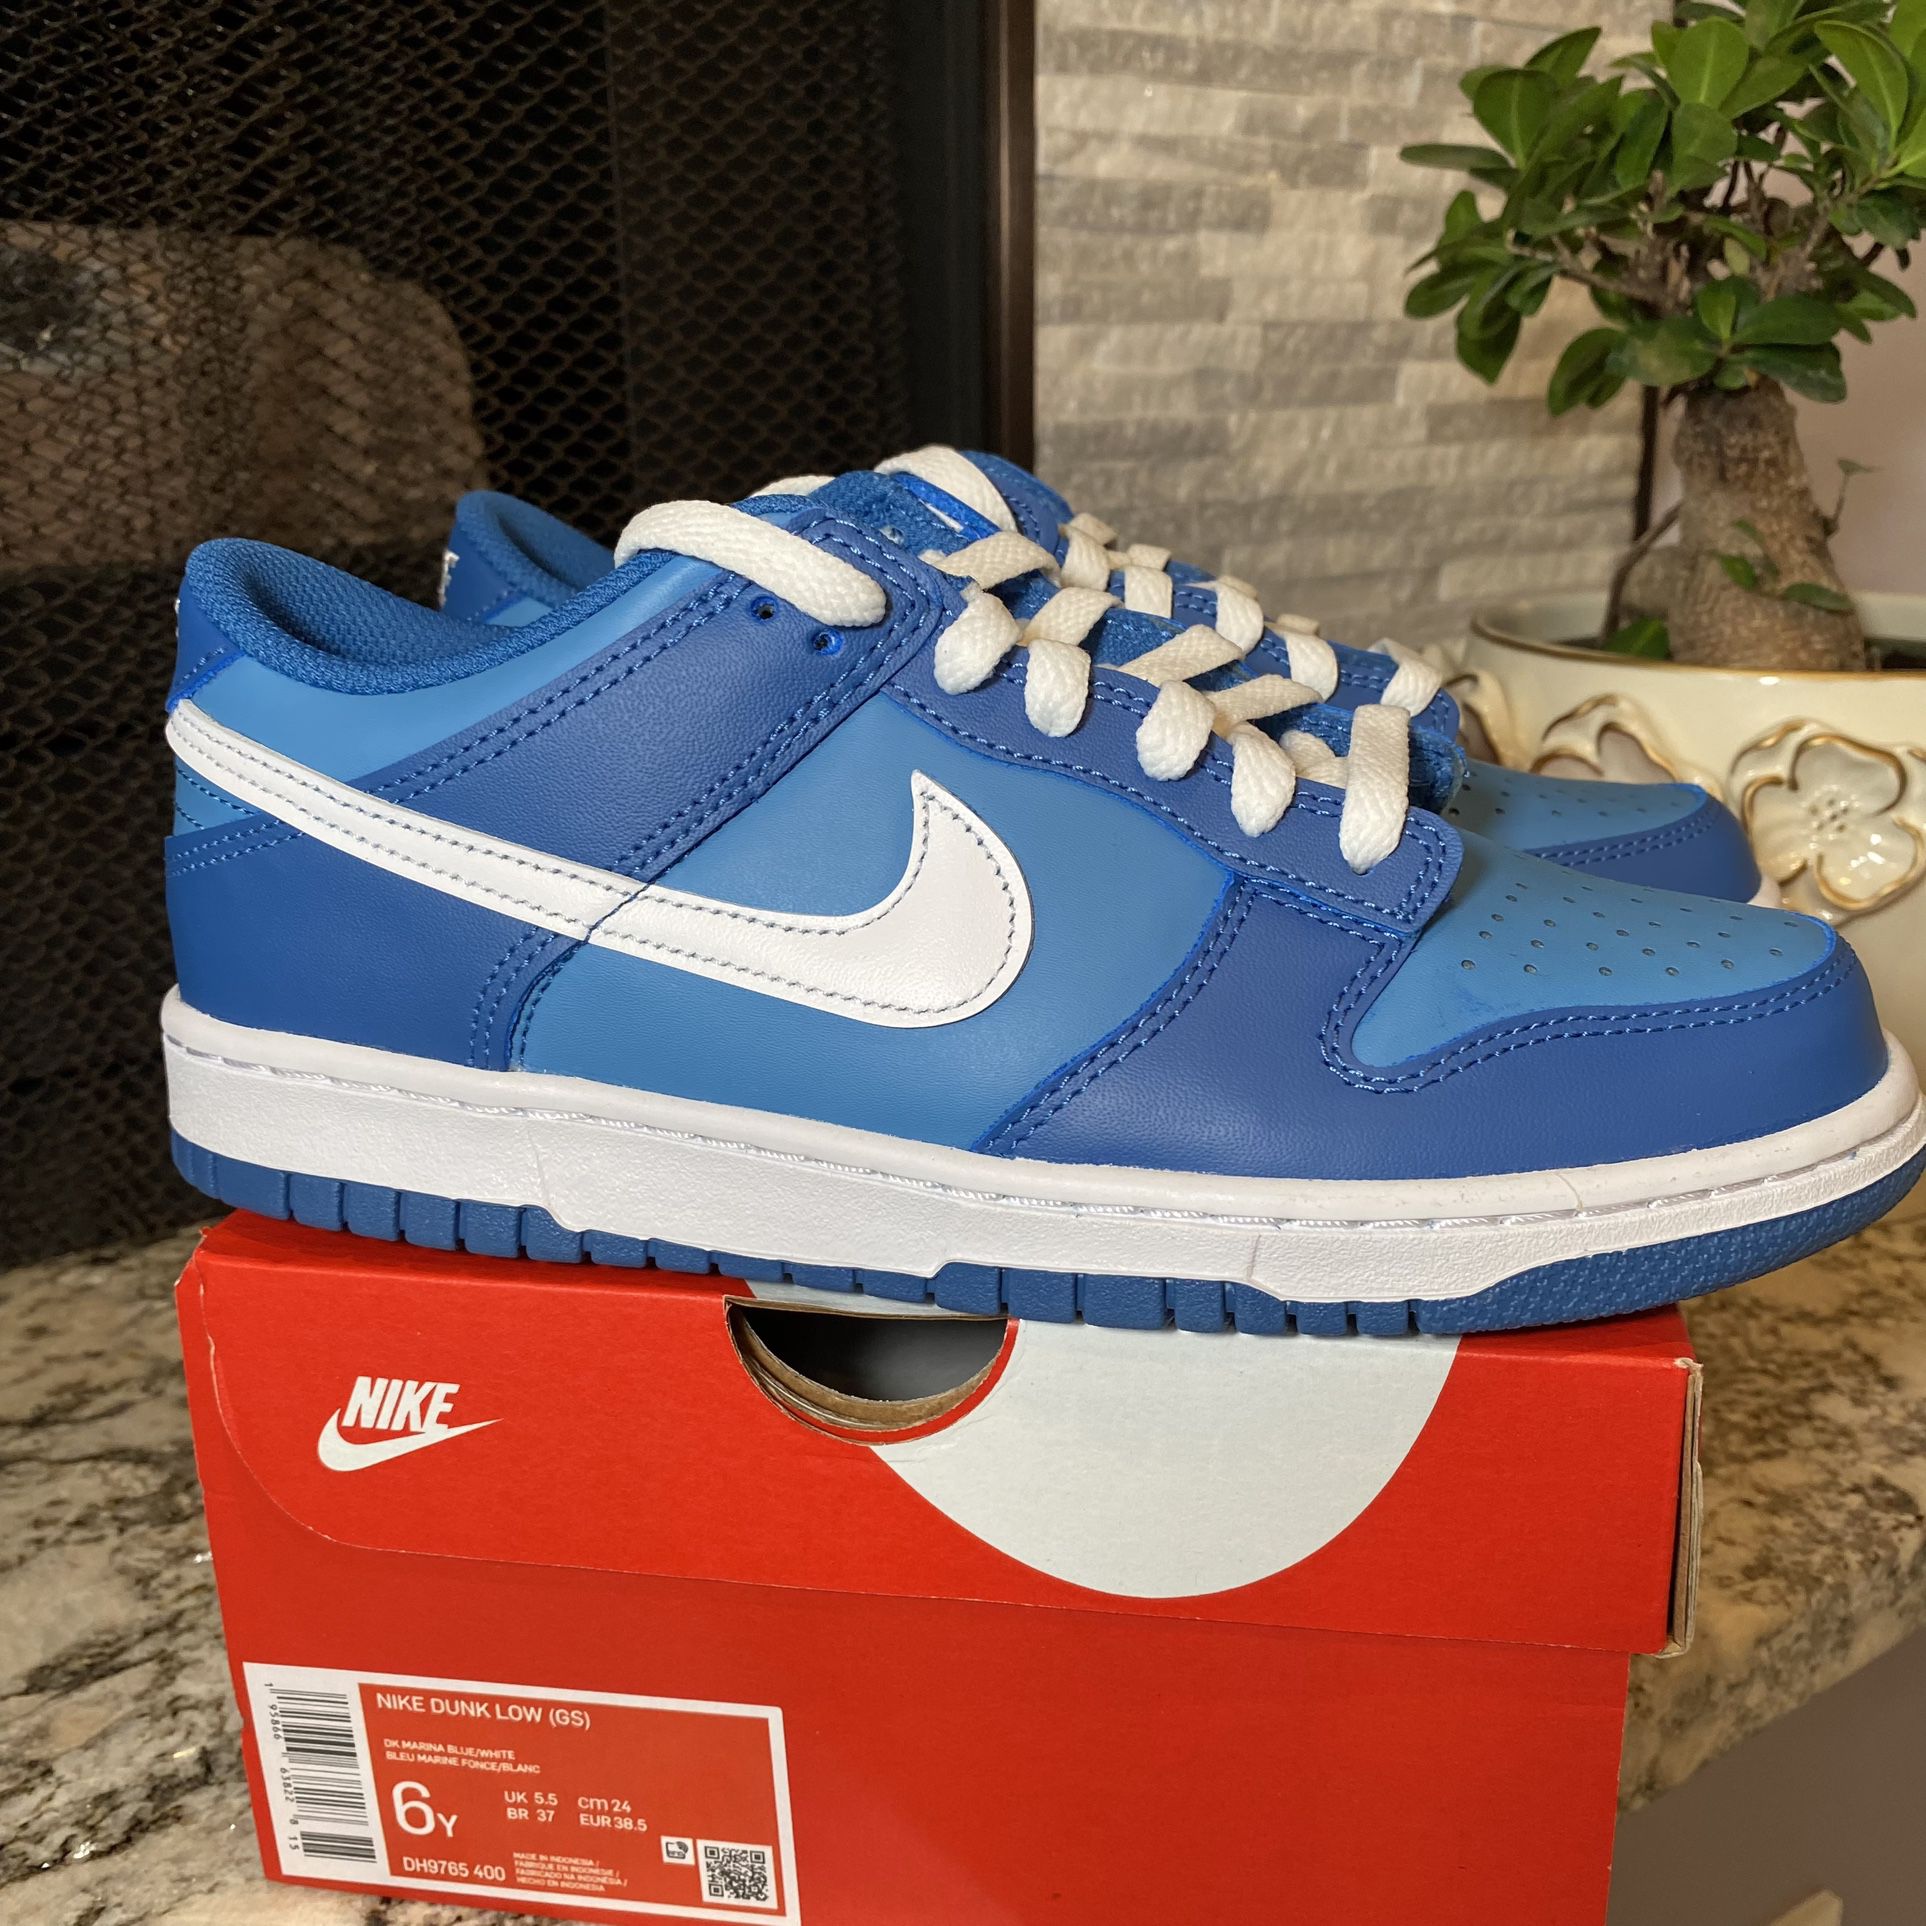 Nike Dunk Low (GS) Marina Blue size 6Y